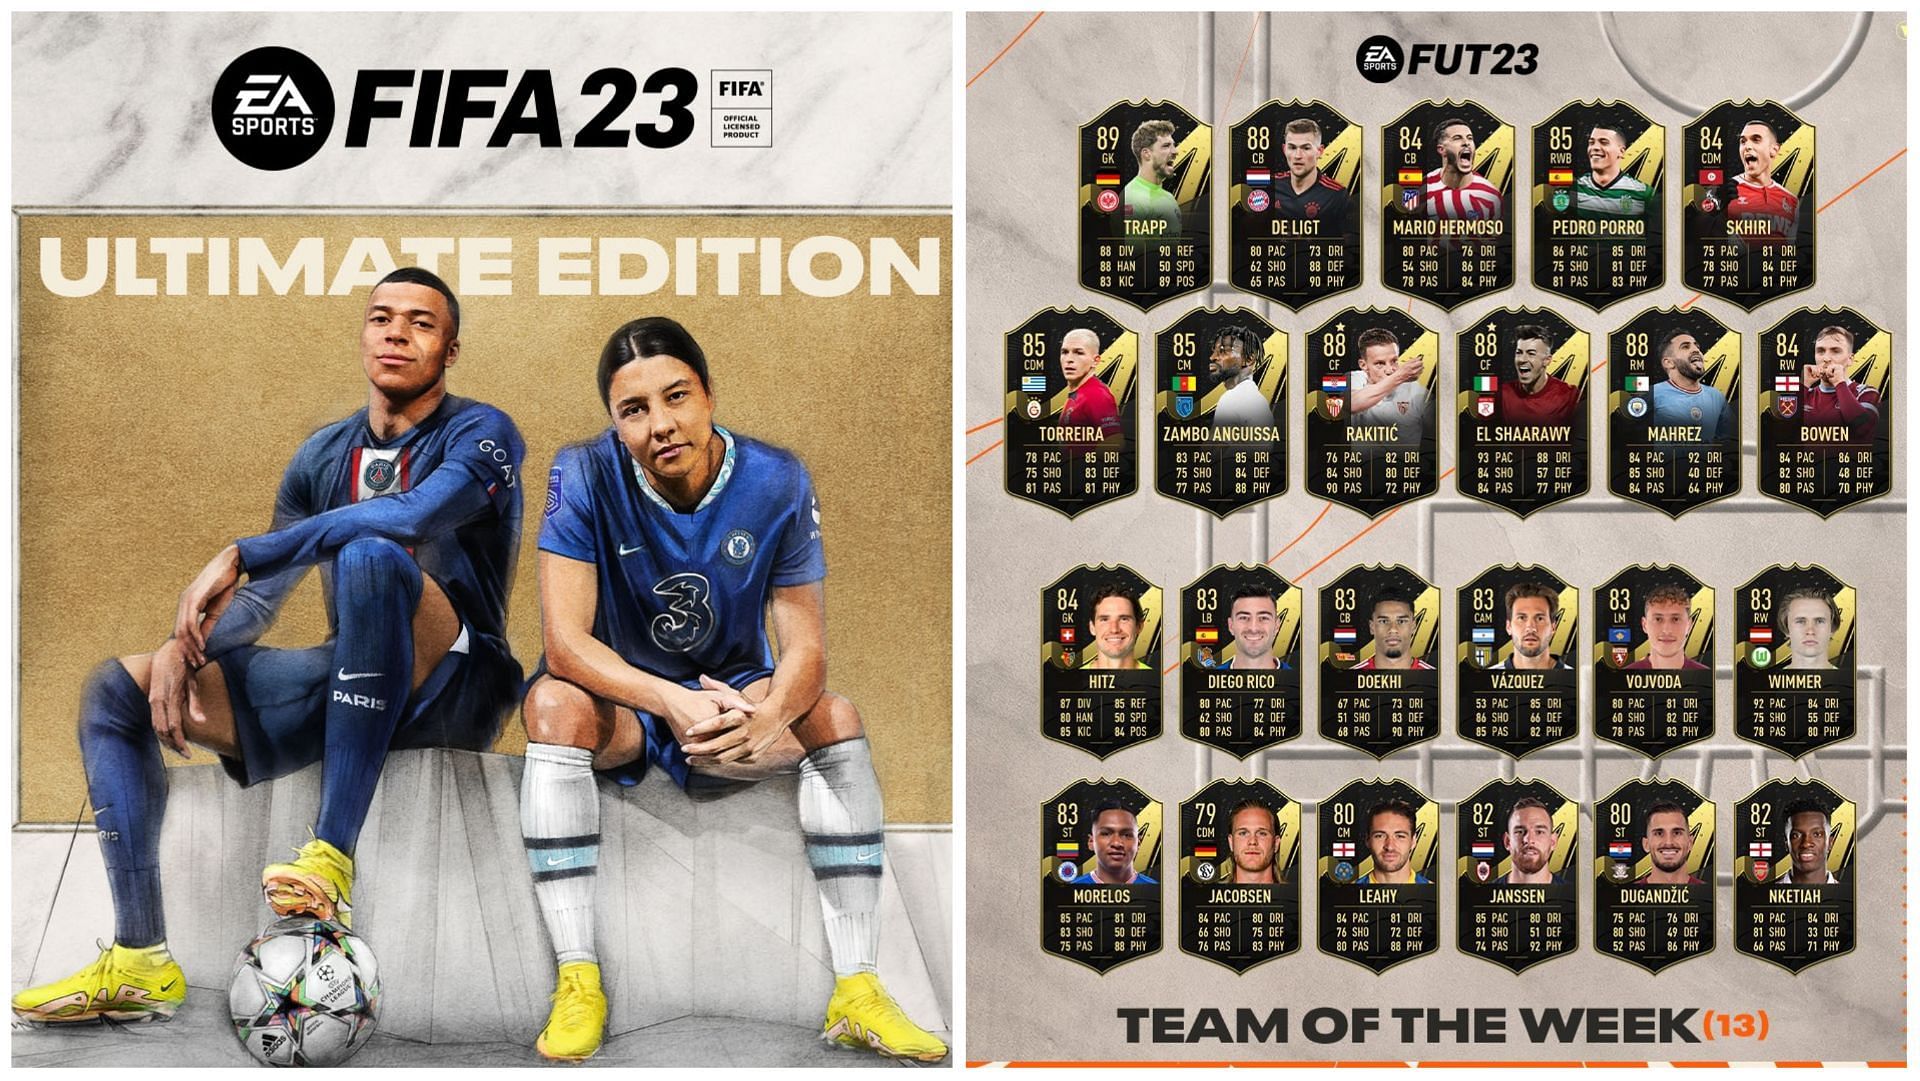 TOTW 13 is live in FIFA 23 (Images via EA Sports)